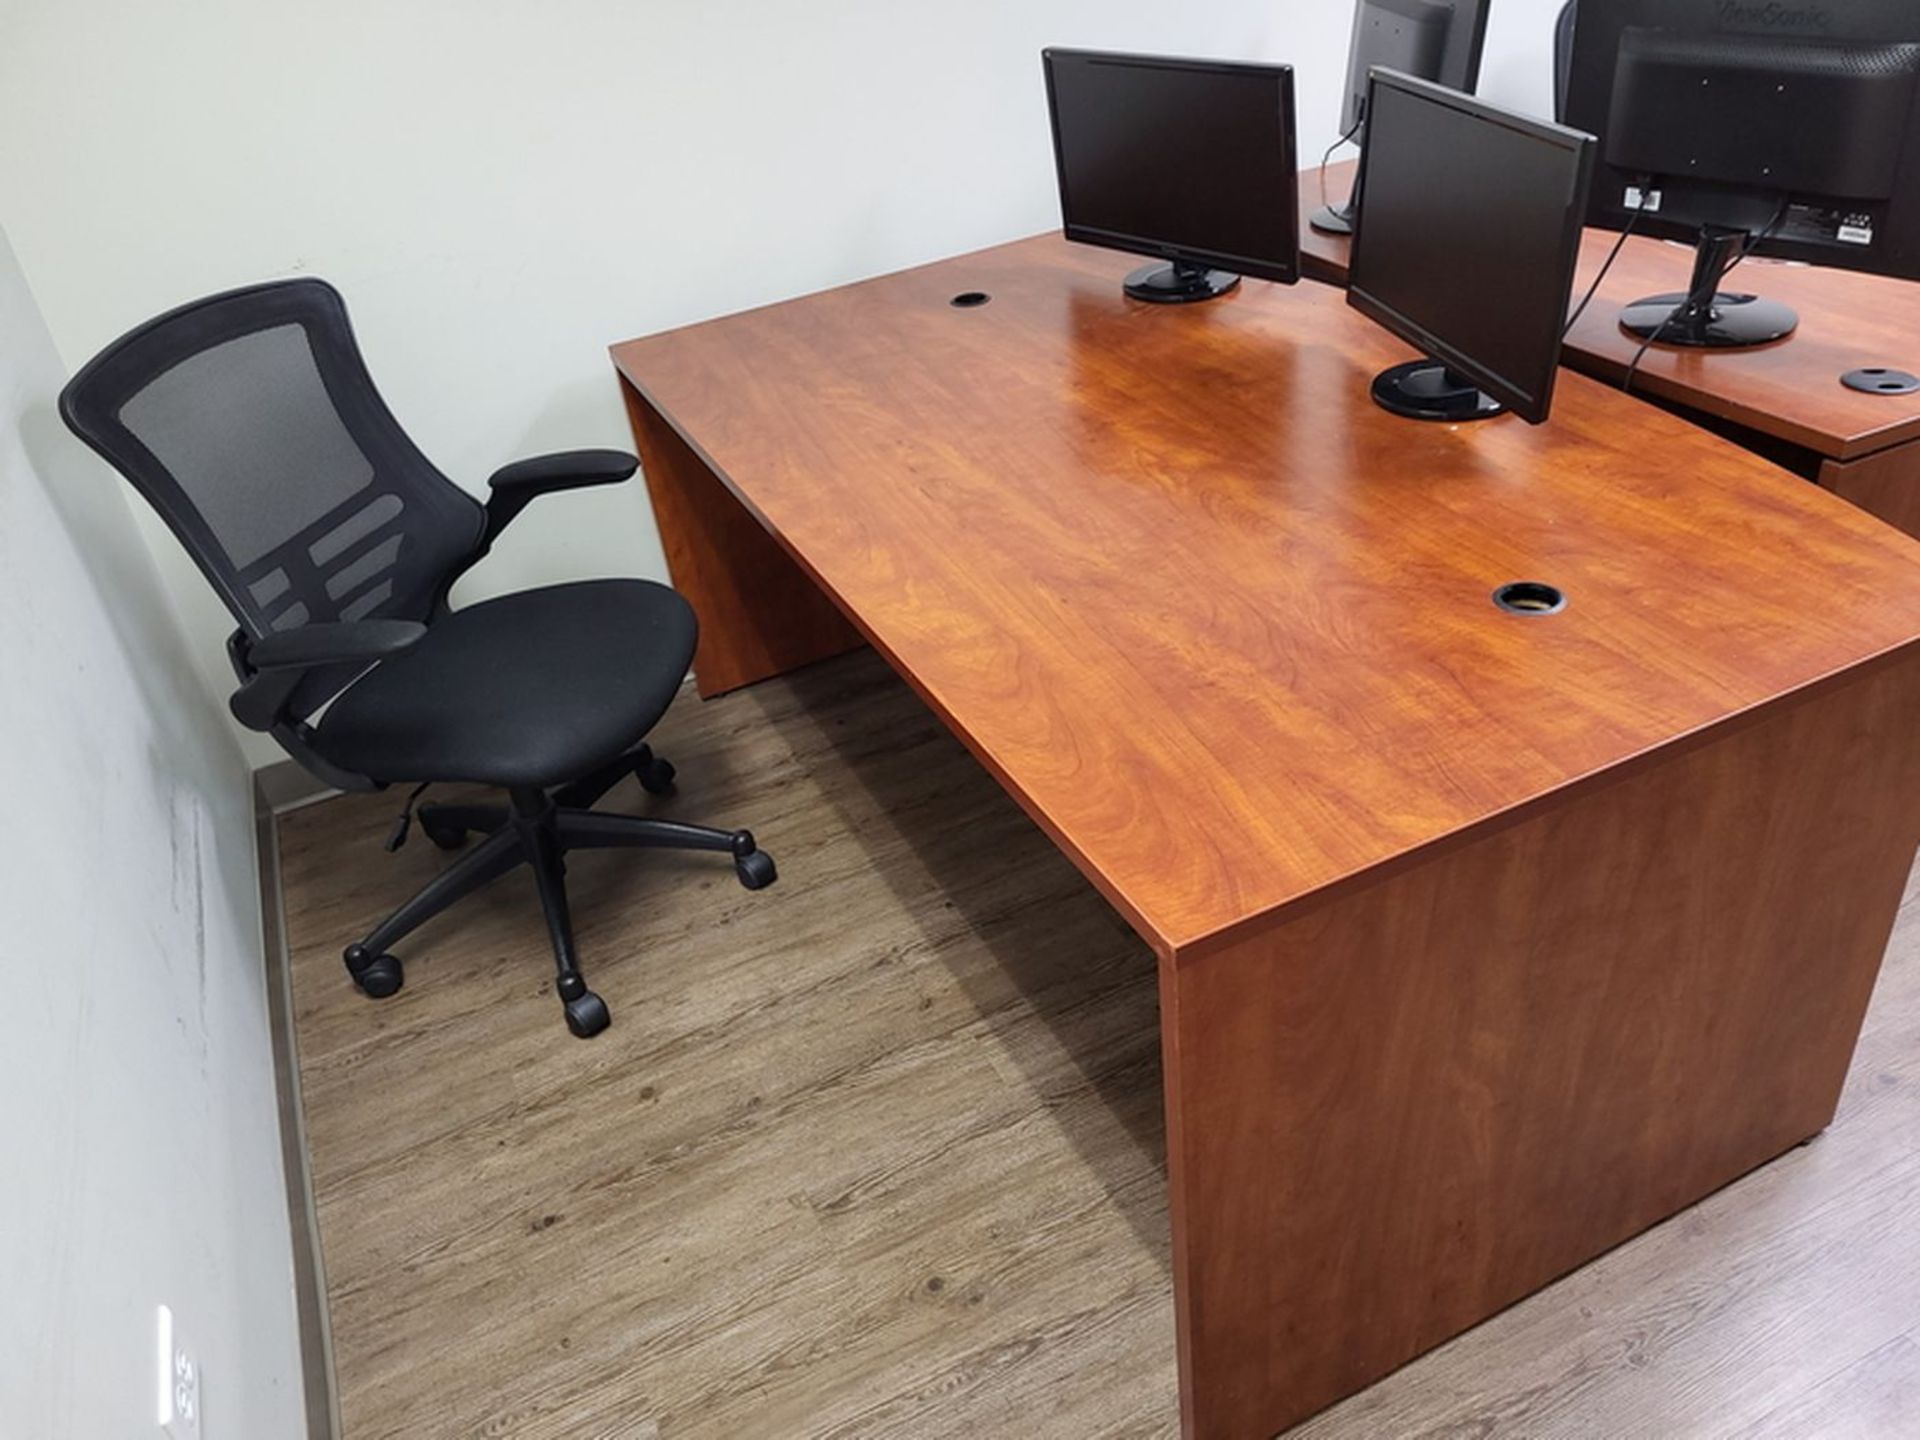 Lot - Office Furnishings; to Include: (2) Wood Office Desks, (2) Monitor Stands with ViewSonic - Image 2 of 3